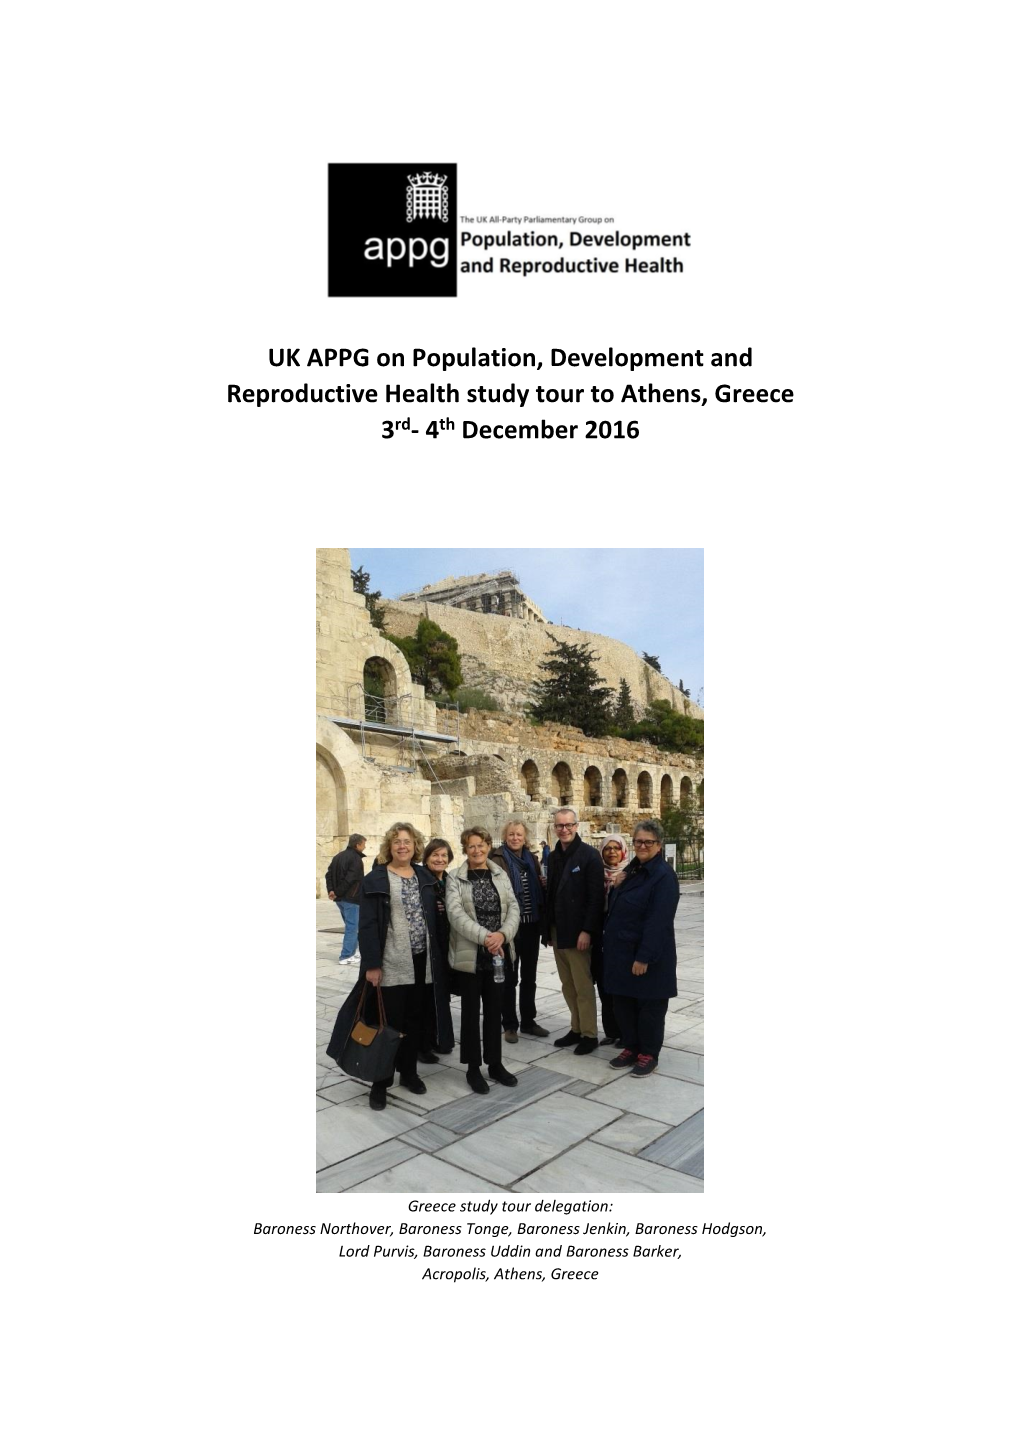 UK APPG on Population, Development and Reproductive Health Study Tour to Athens, Greece 3Rd- 4Th December 2016